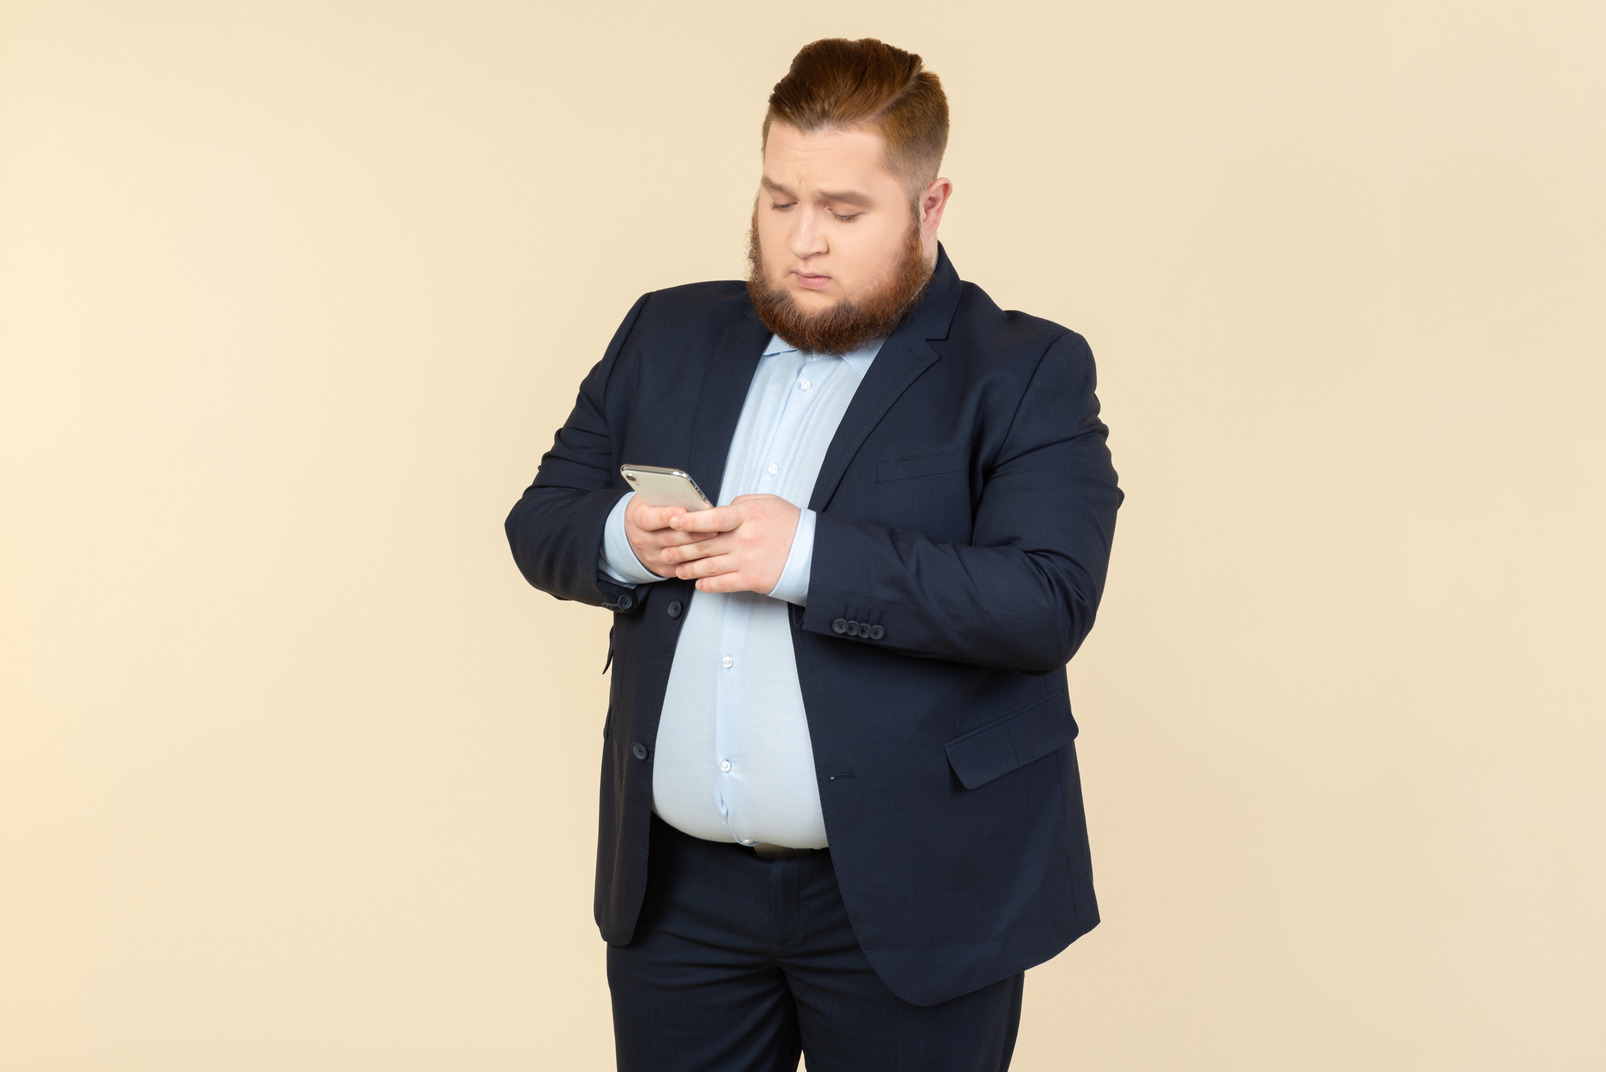 Young overweight office worker checking phone